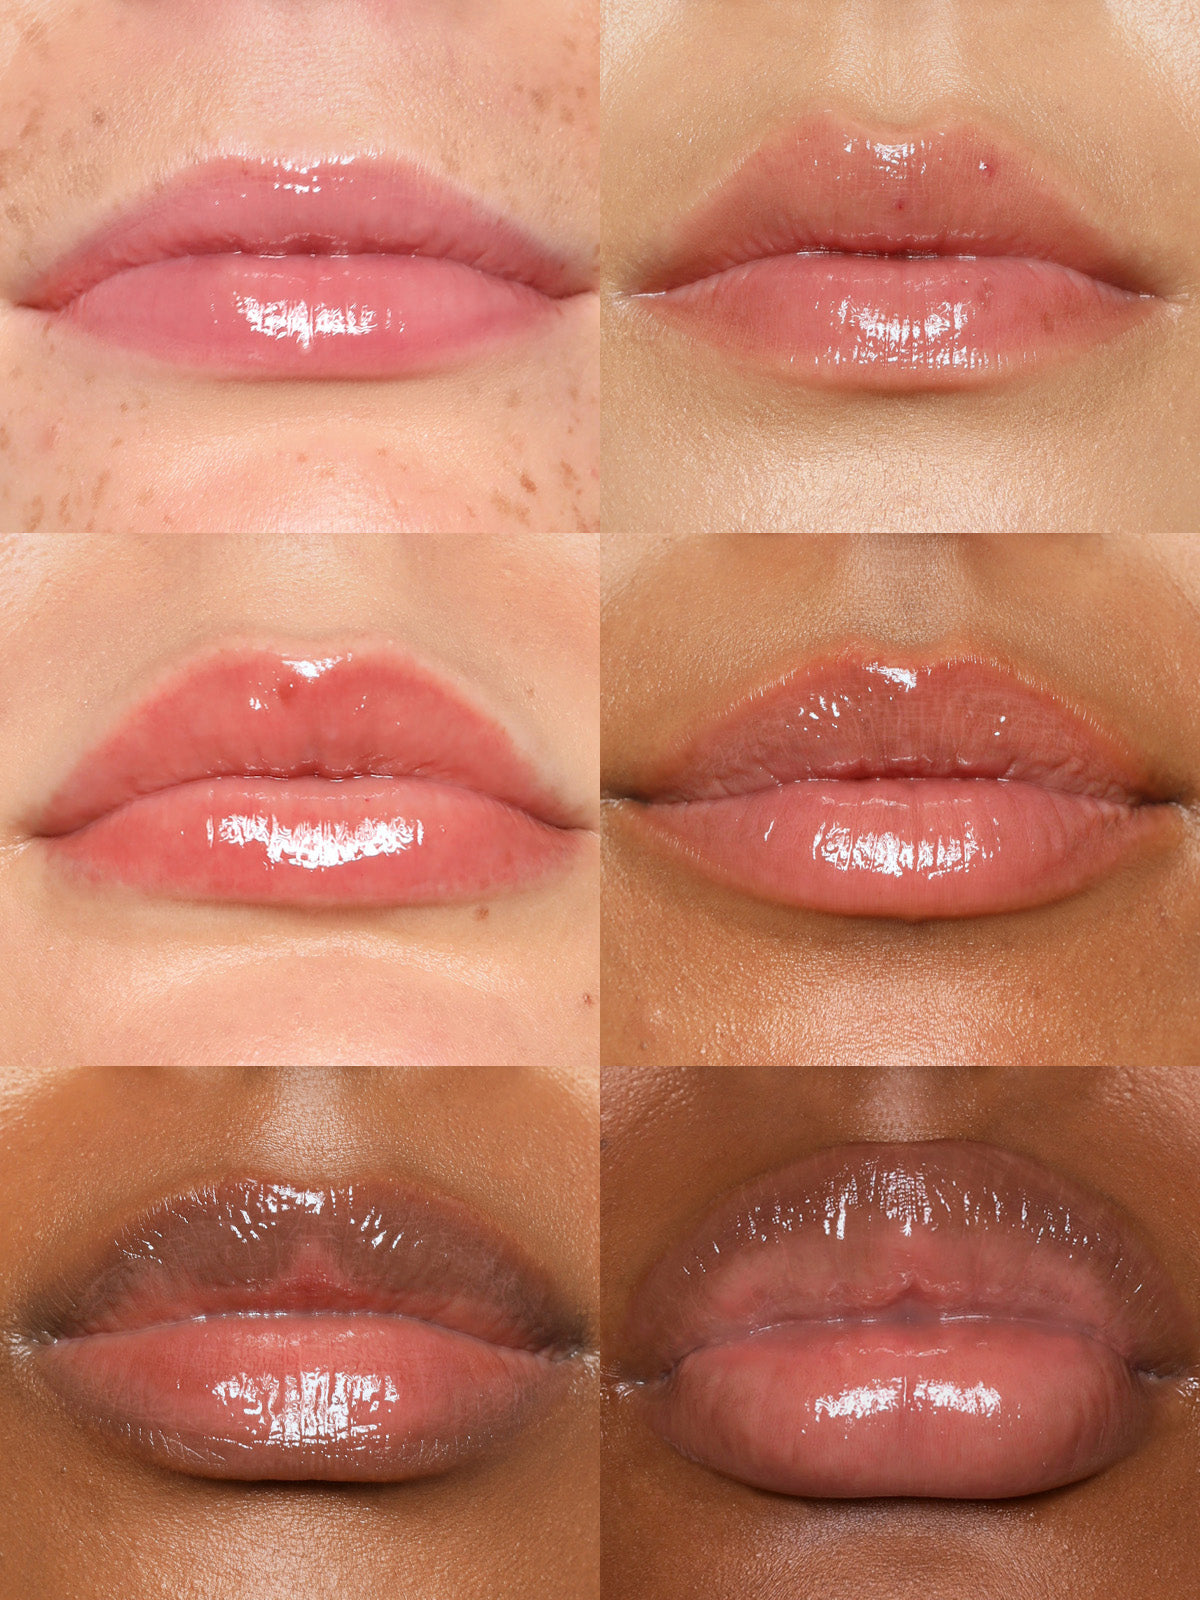 GRID OF REFY LIP GLOSS IN SHADE BLUSH ON DIFFERENT SKIN TONES